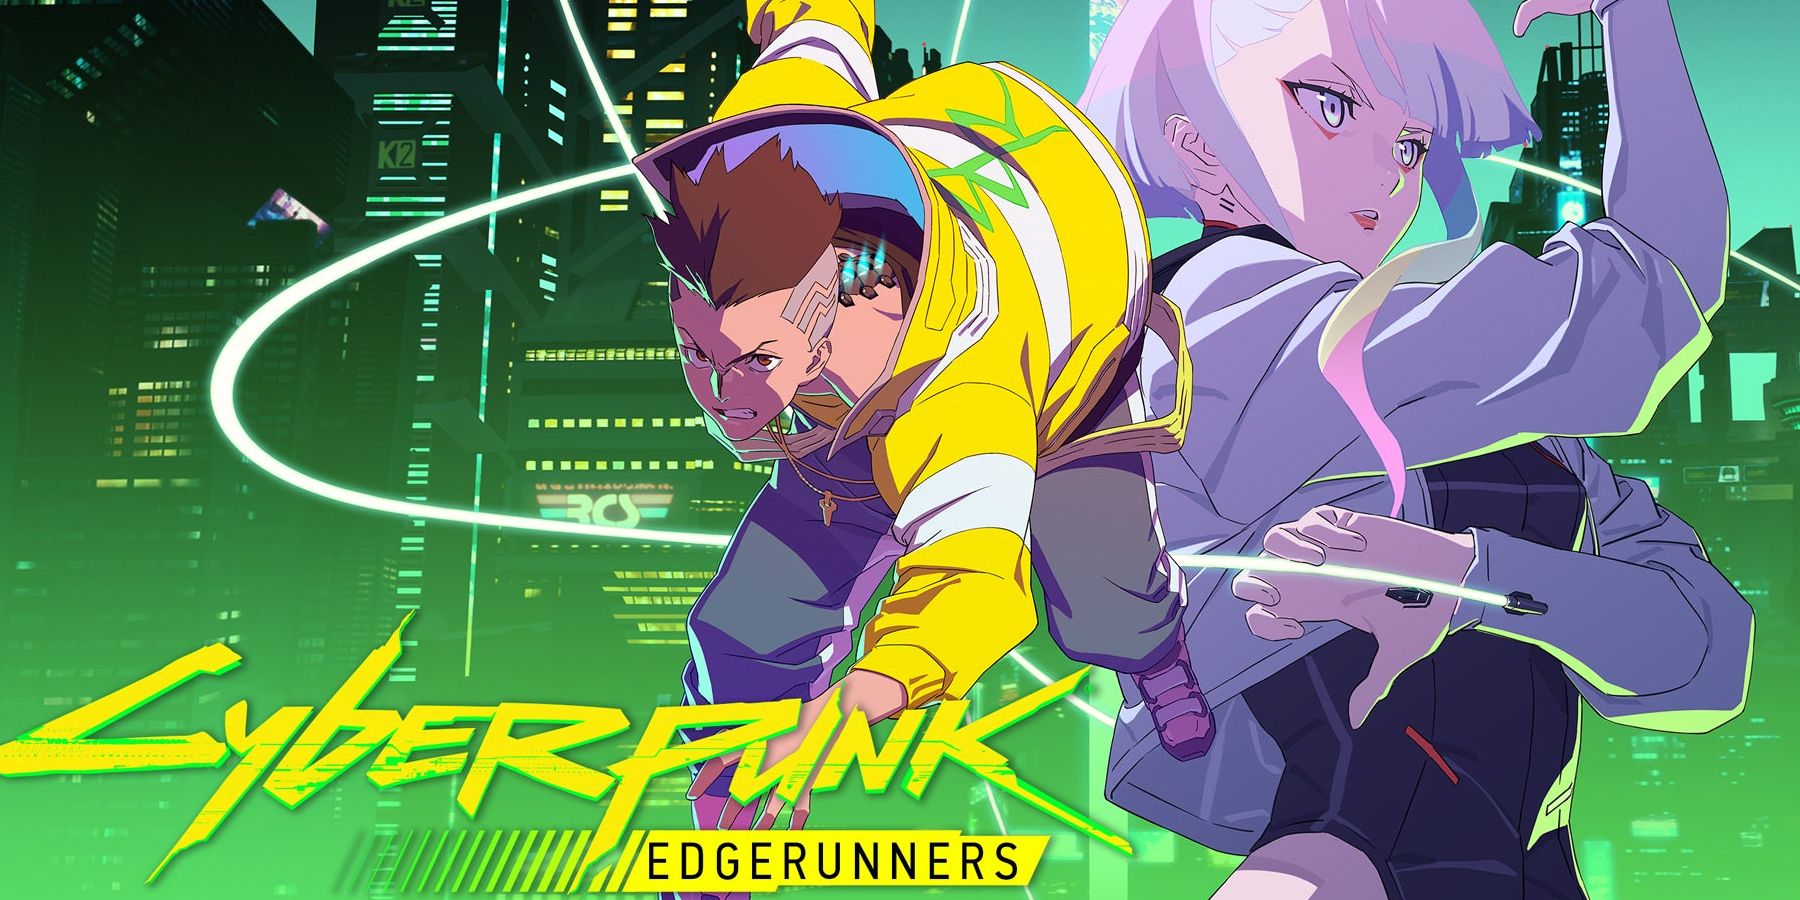 Redesigned Cyberpunk 2077 perks references Edgerunners anime